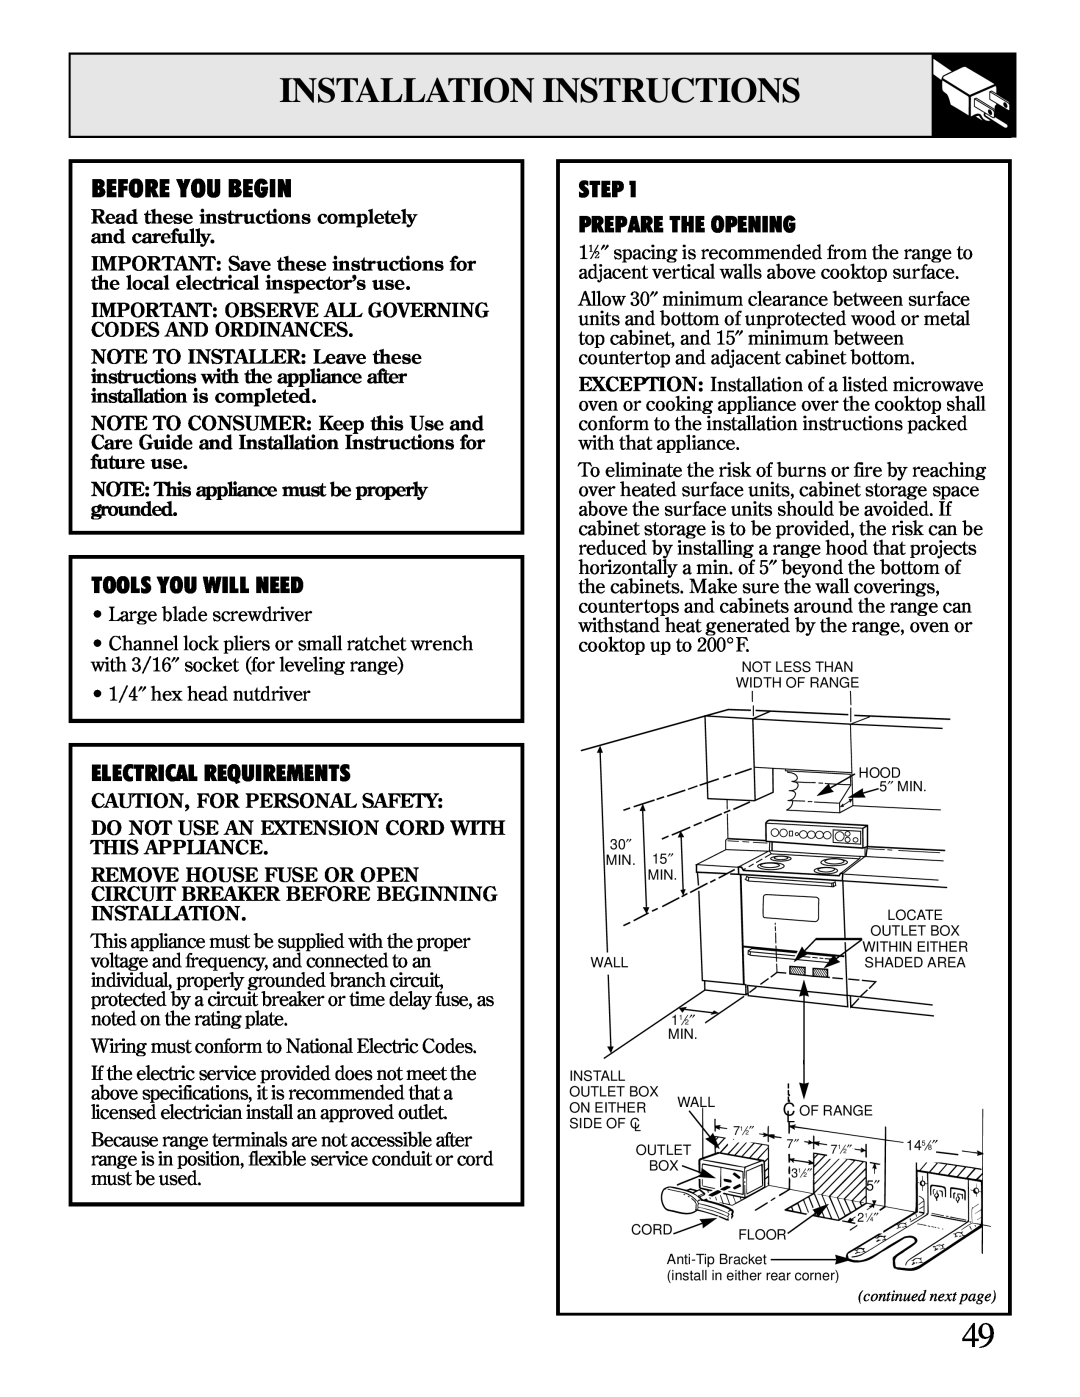 GE JBP95 warranty Installation Instructions, Before You Begin, Tools You Will Need, Electrical Requirements 